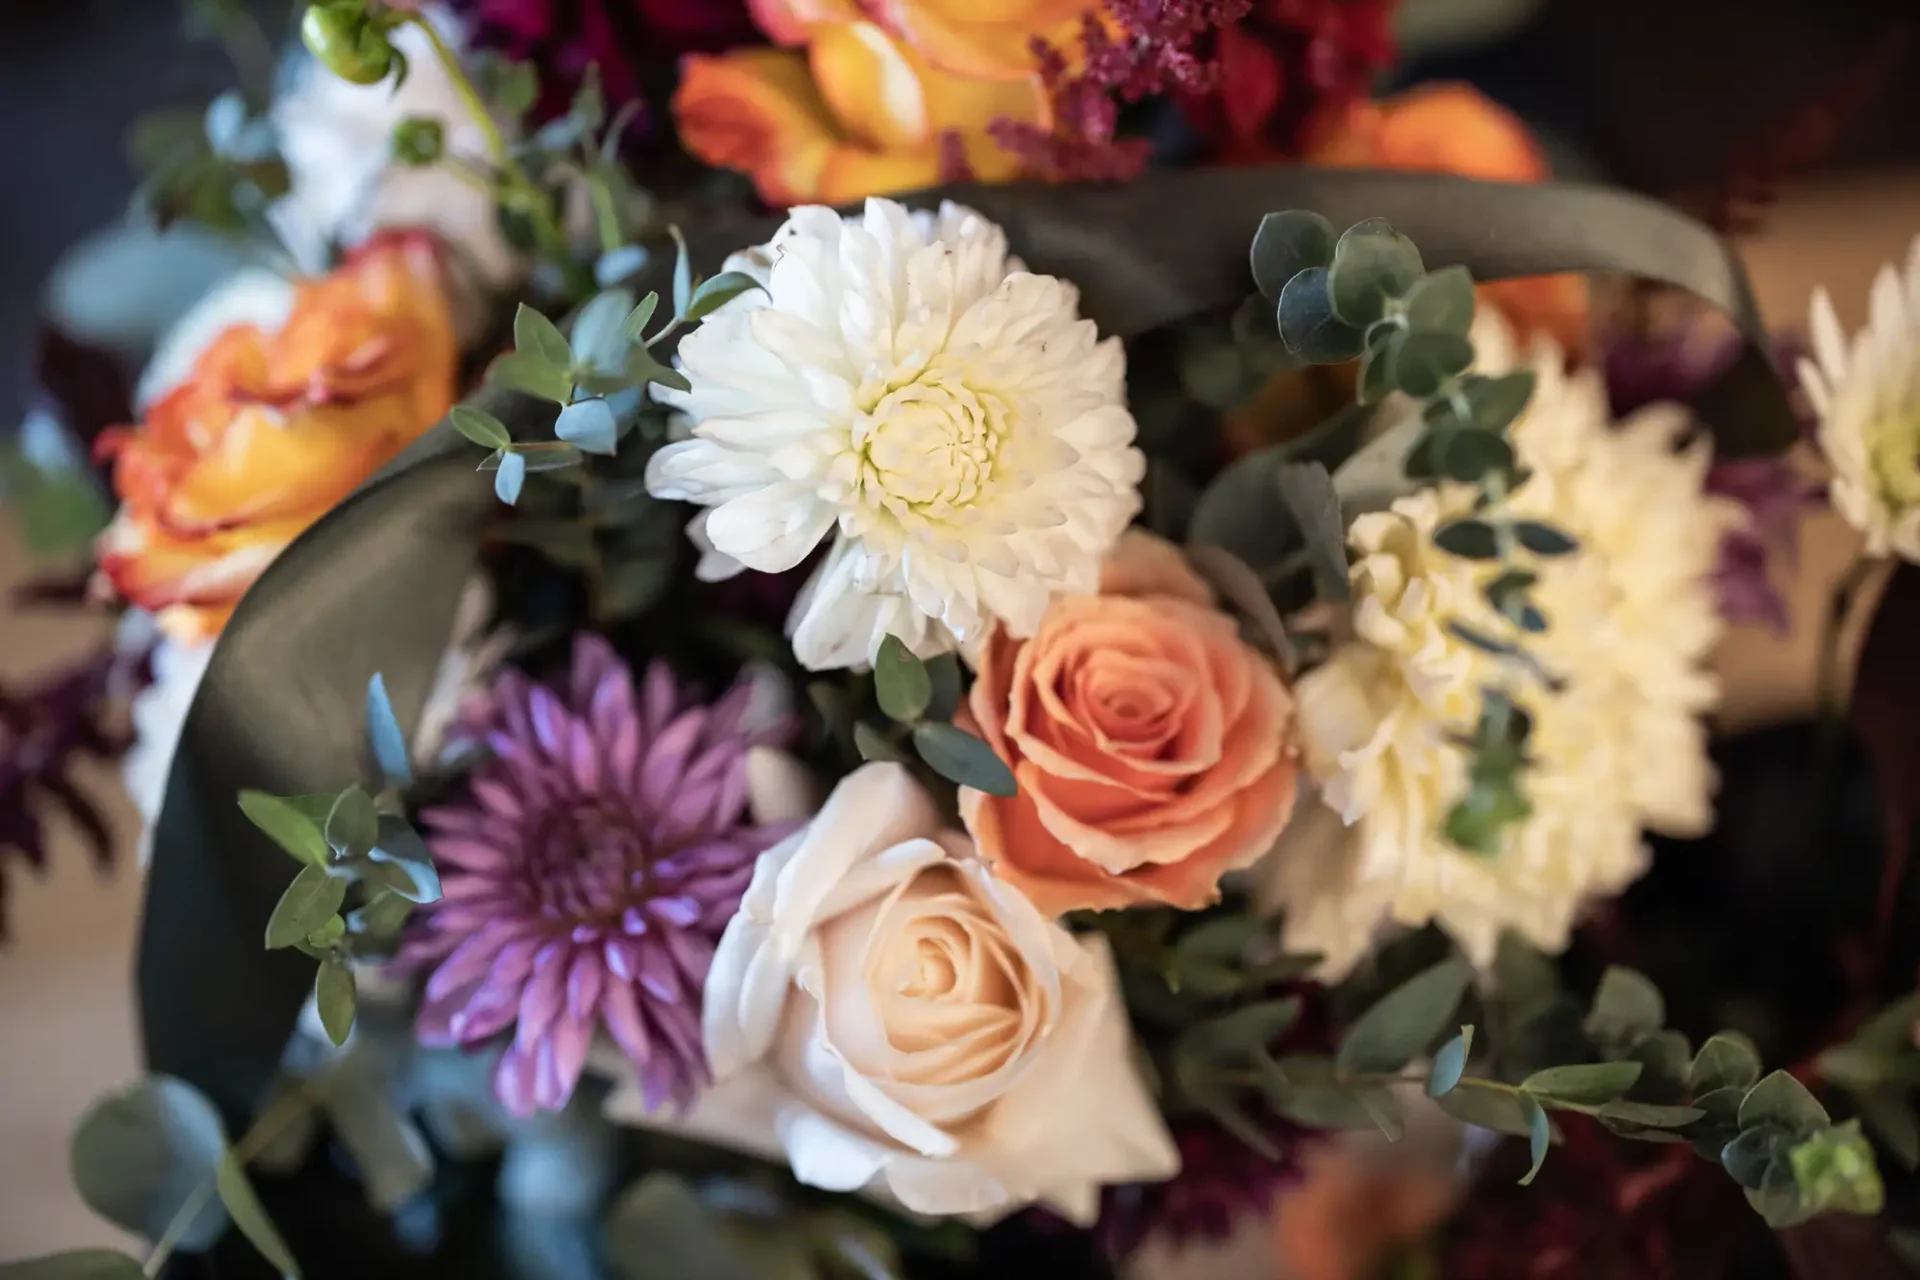 A close-up of a vibrant floral arrangement featuring white, peach, and purple flowers with greenery and ribbon accents.